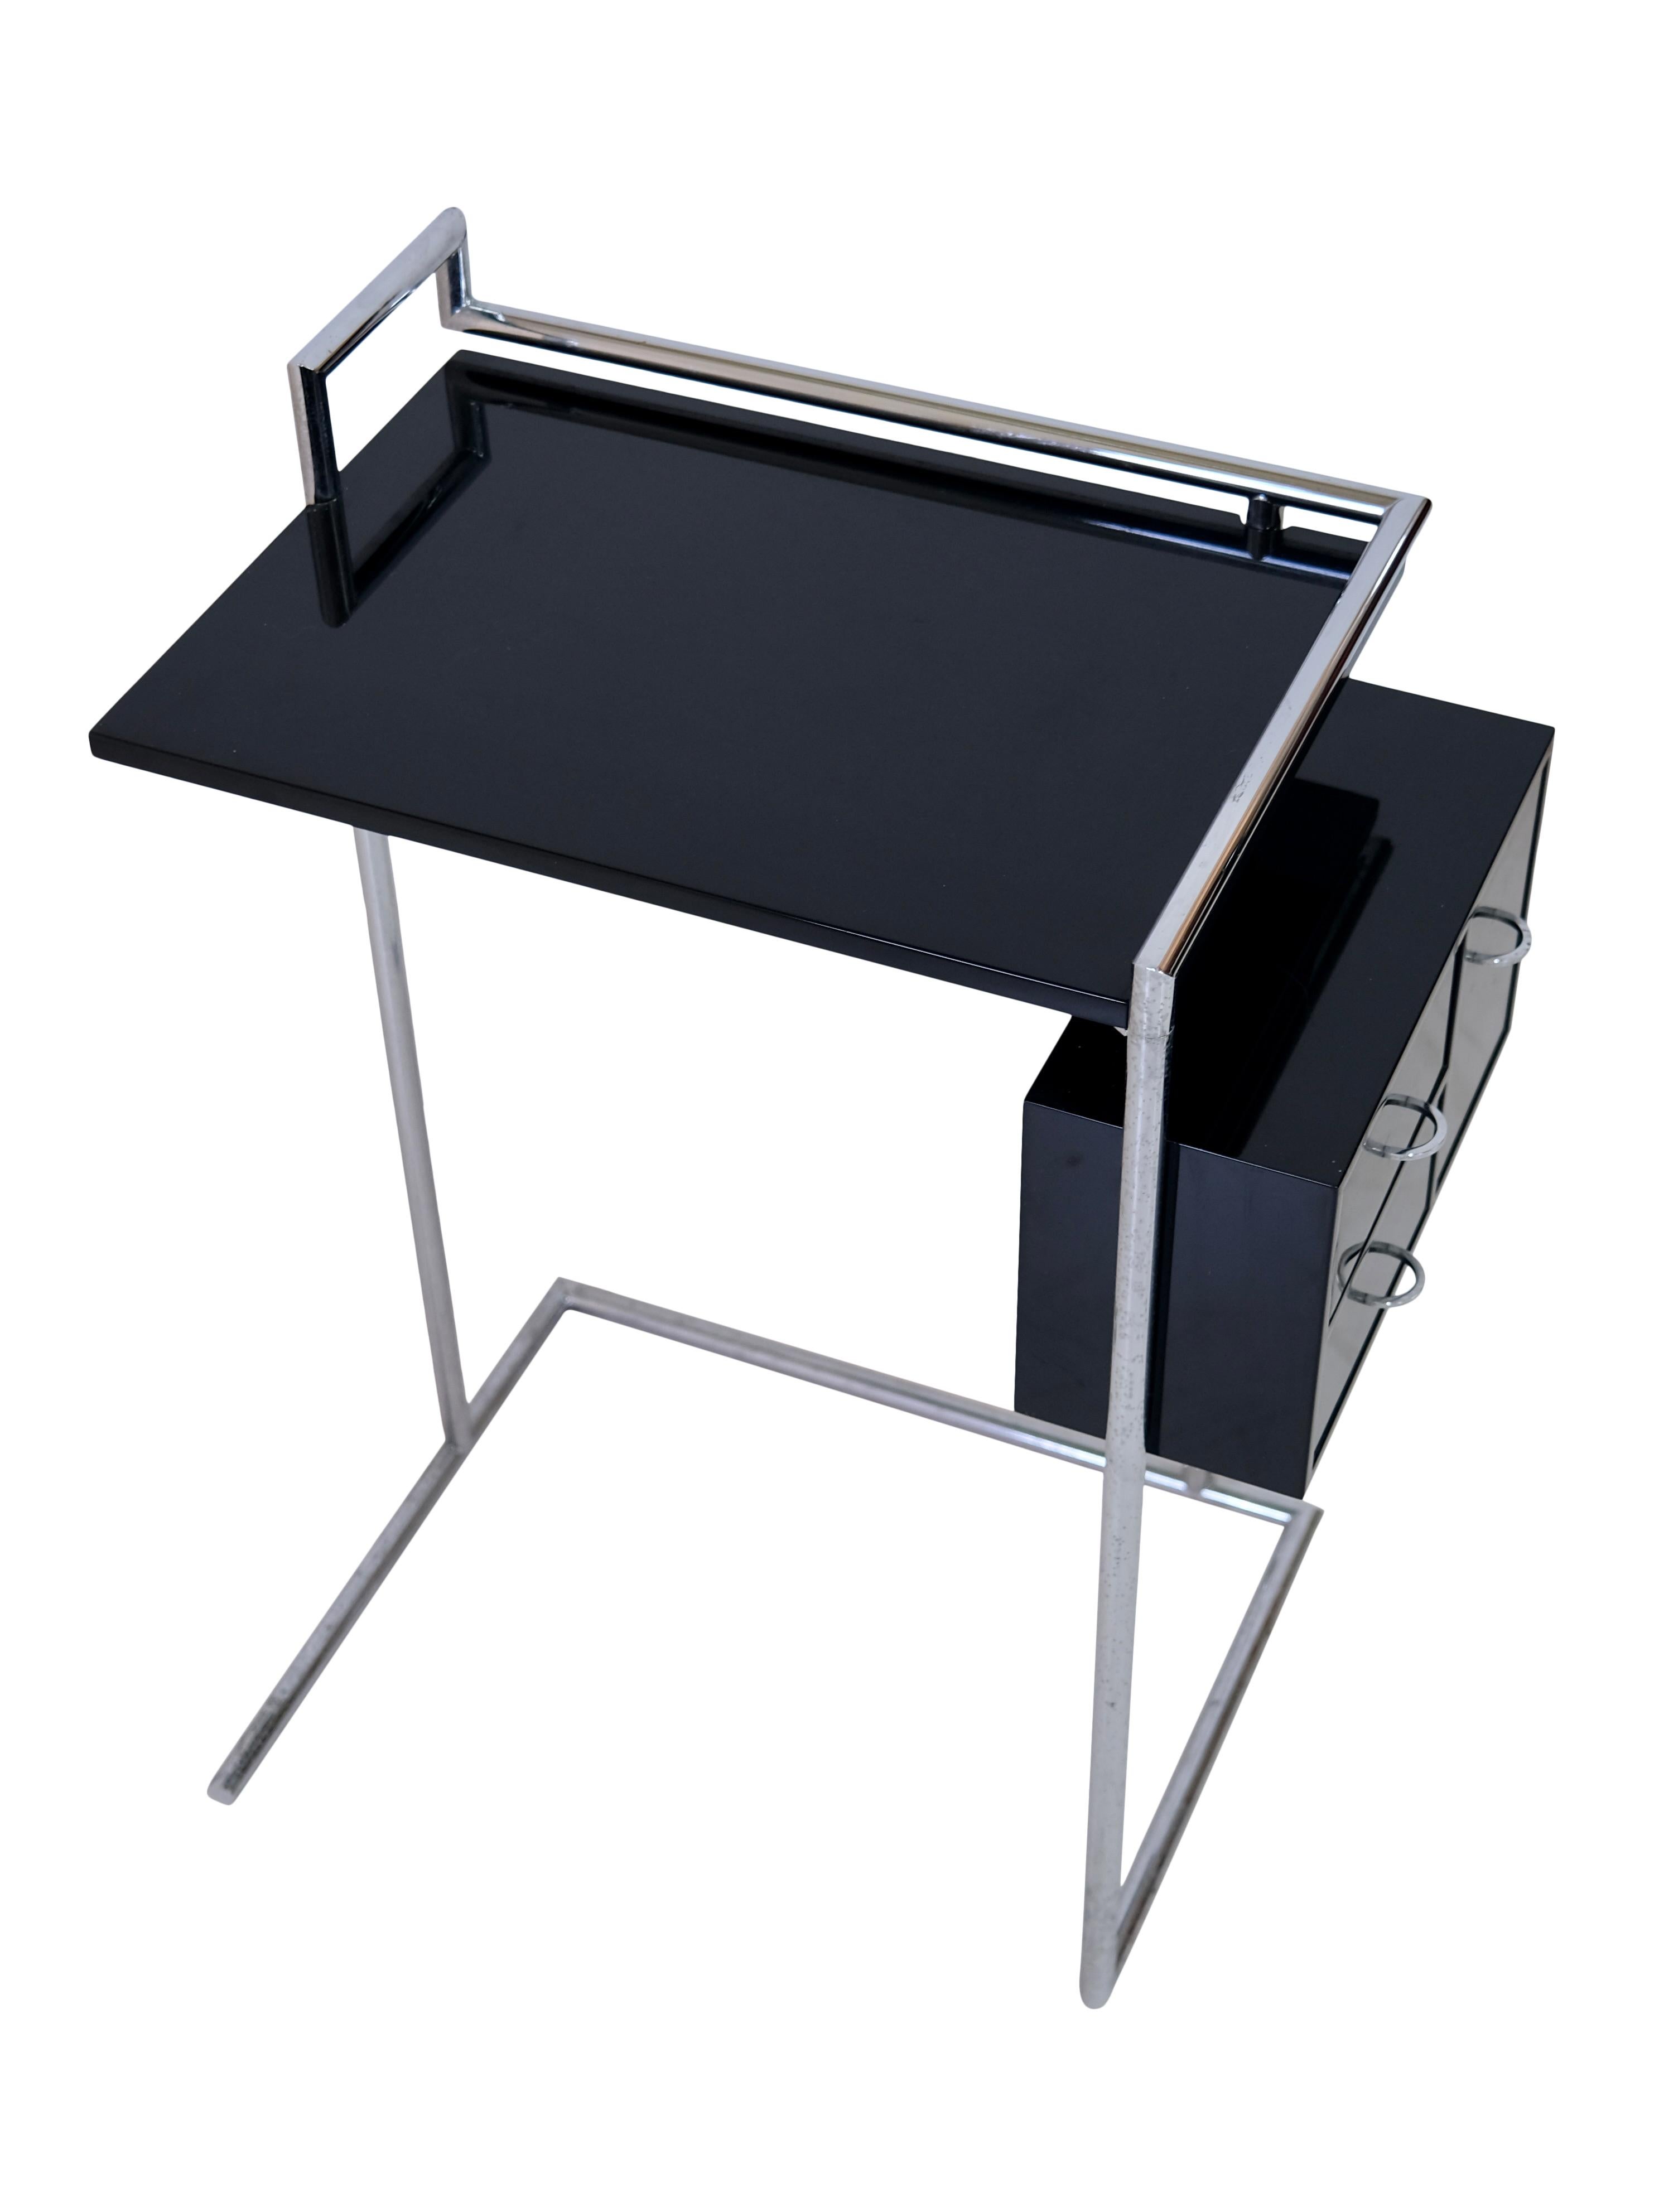 Coiffeuse by Eileen Gray

Design classic, design from 1926 by Eileen Gray
Manufacturer: ClassiCon (licensed)
Germany, 1990s

Panels in black with chrome-plated steel tubes
Swinging drawers

Dimensions:
Width: 64 cm
Height: 84 cm
Depth: 40 cm
Working